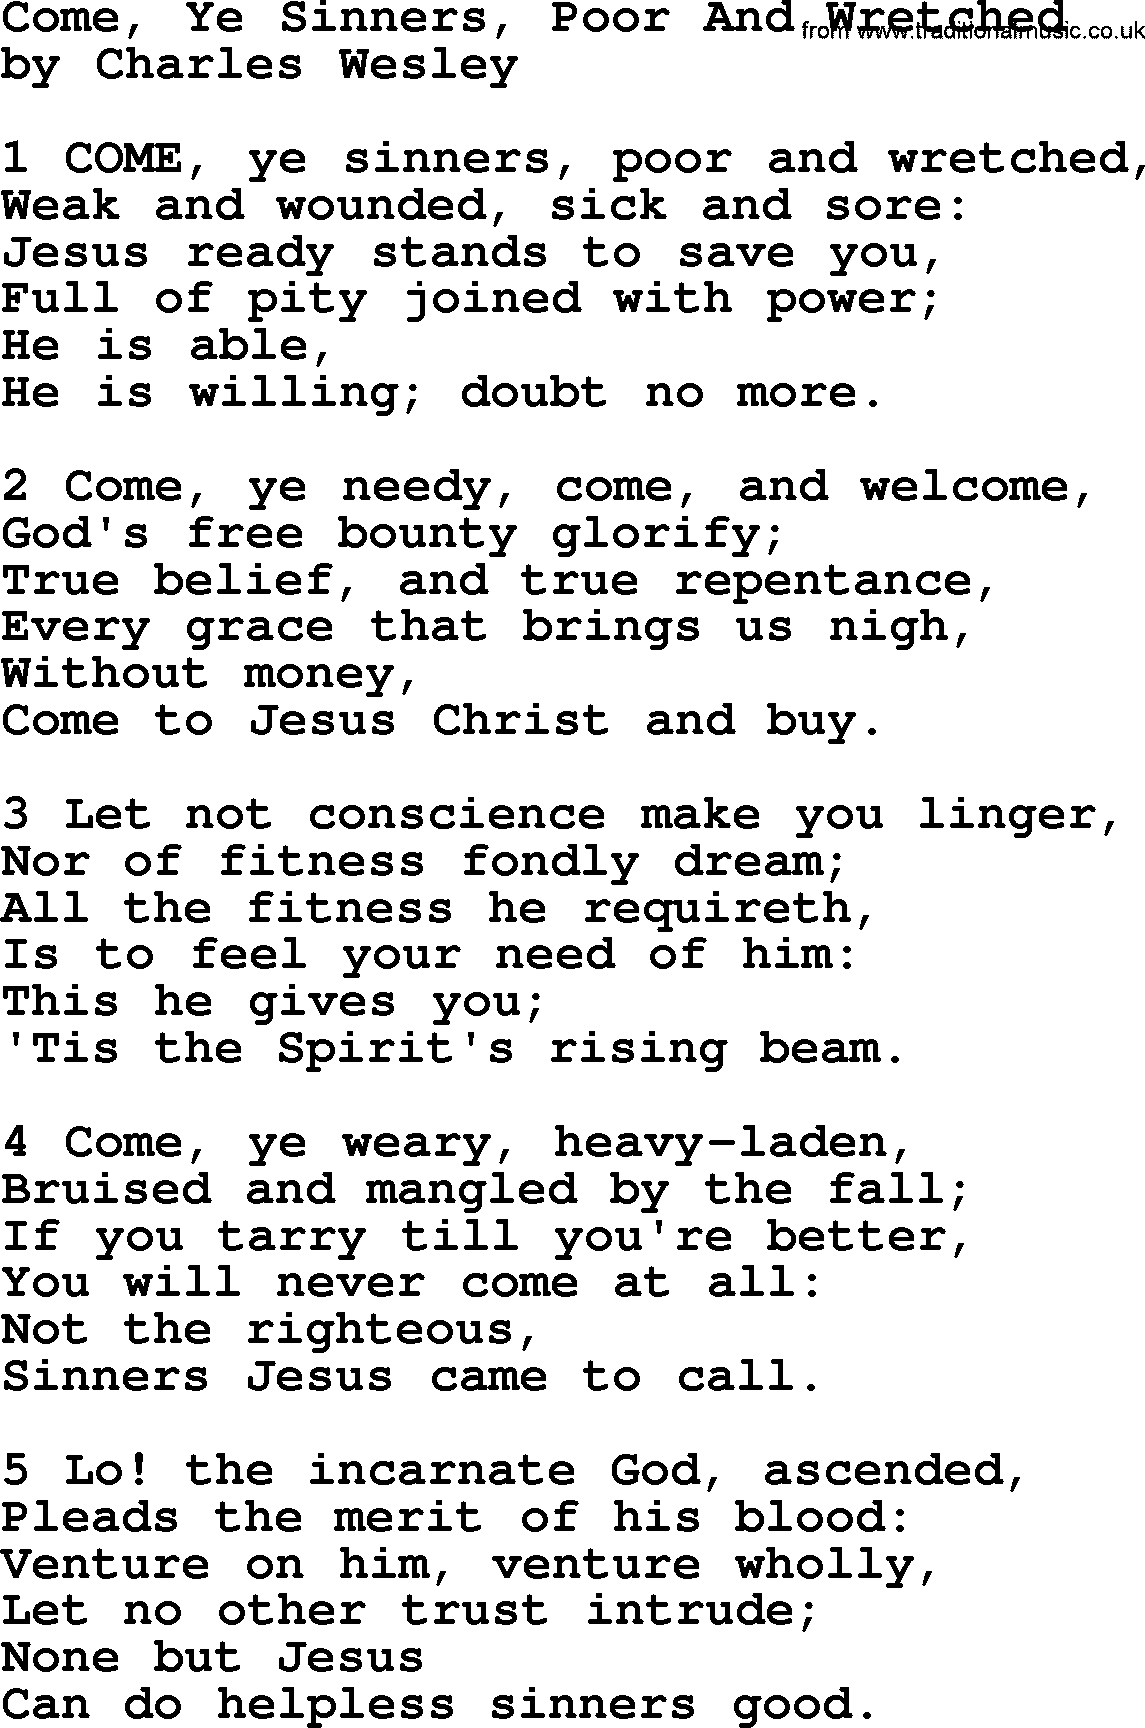 Charles Wesley hymn: Come, Ye Sinners, Poor And Wretched, lyrics